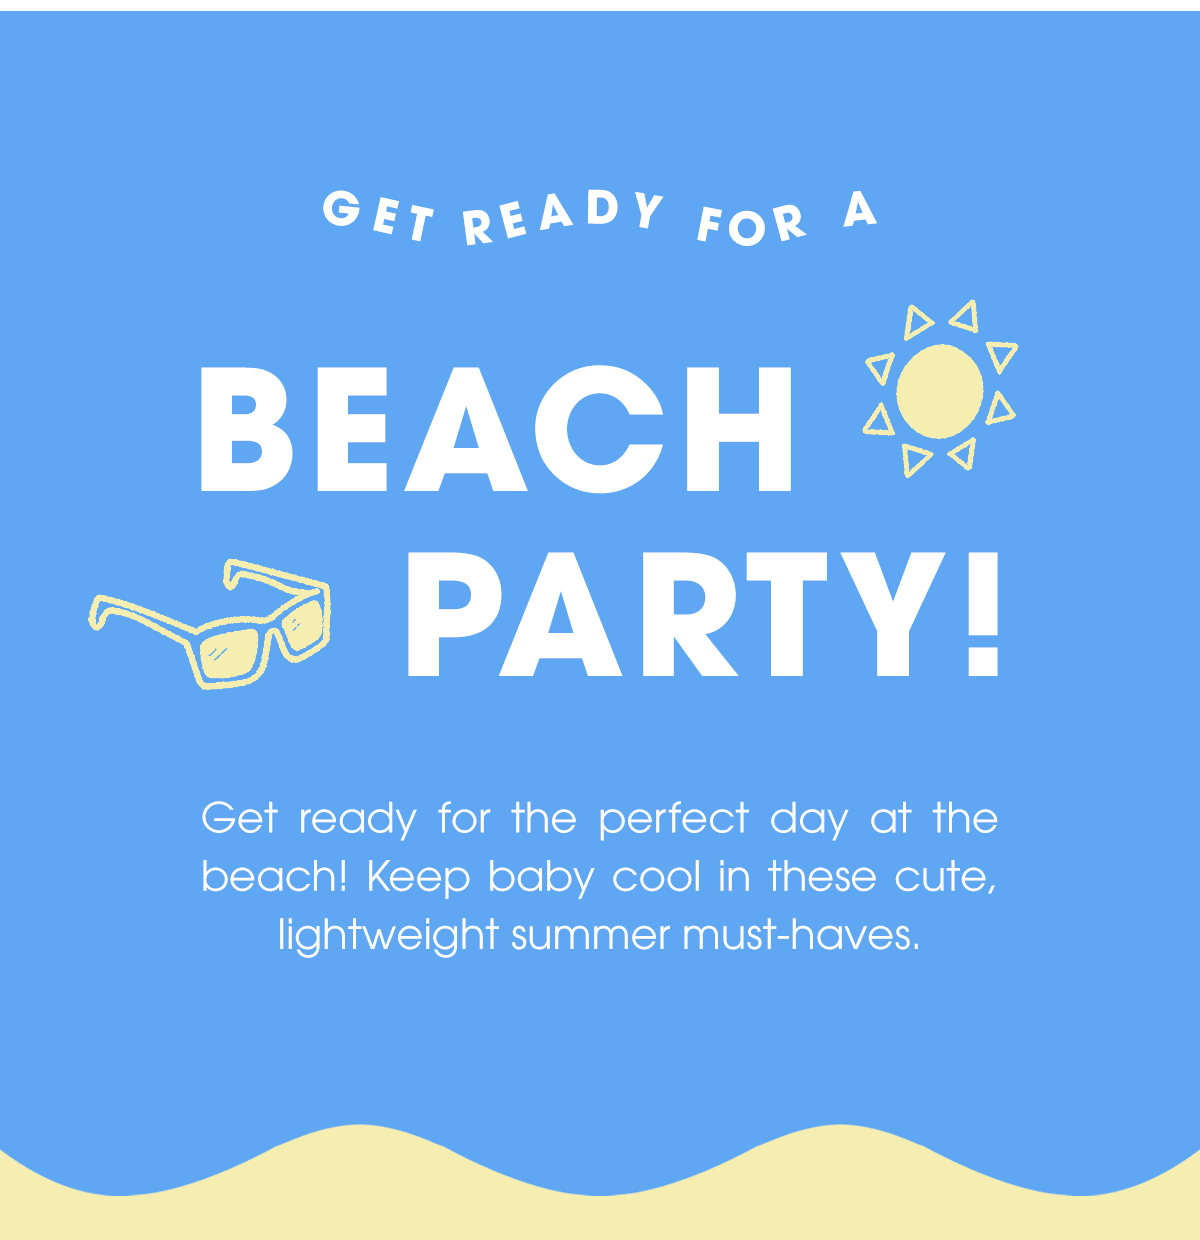 Get ready for a beach party! Get ready for the perfect day at the beach! Keep baby cool in these cute, lightweight summer must-haves.